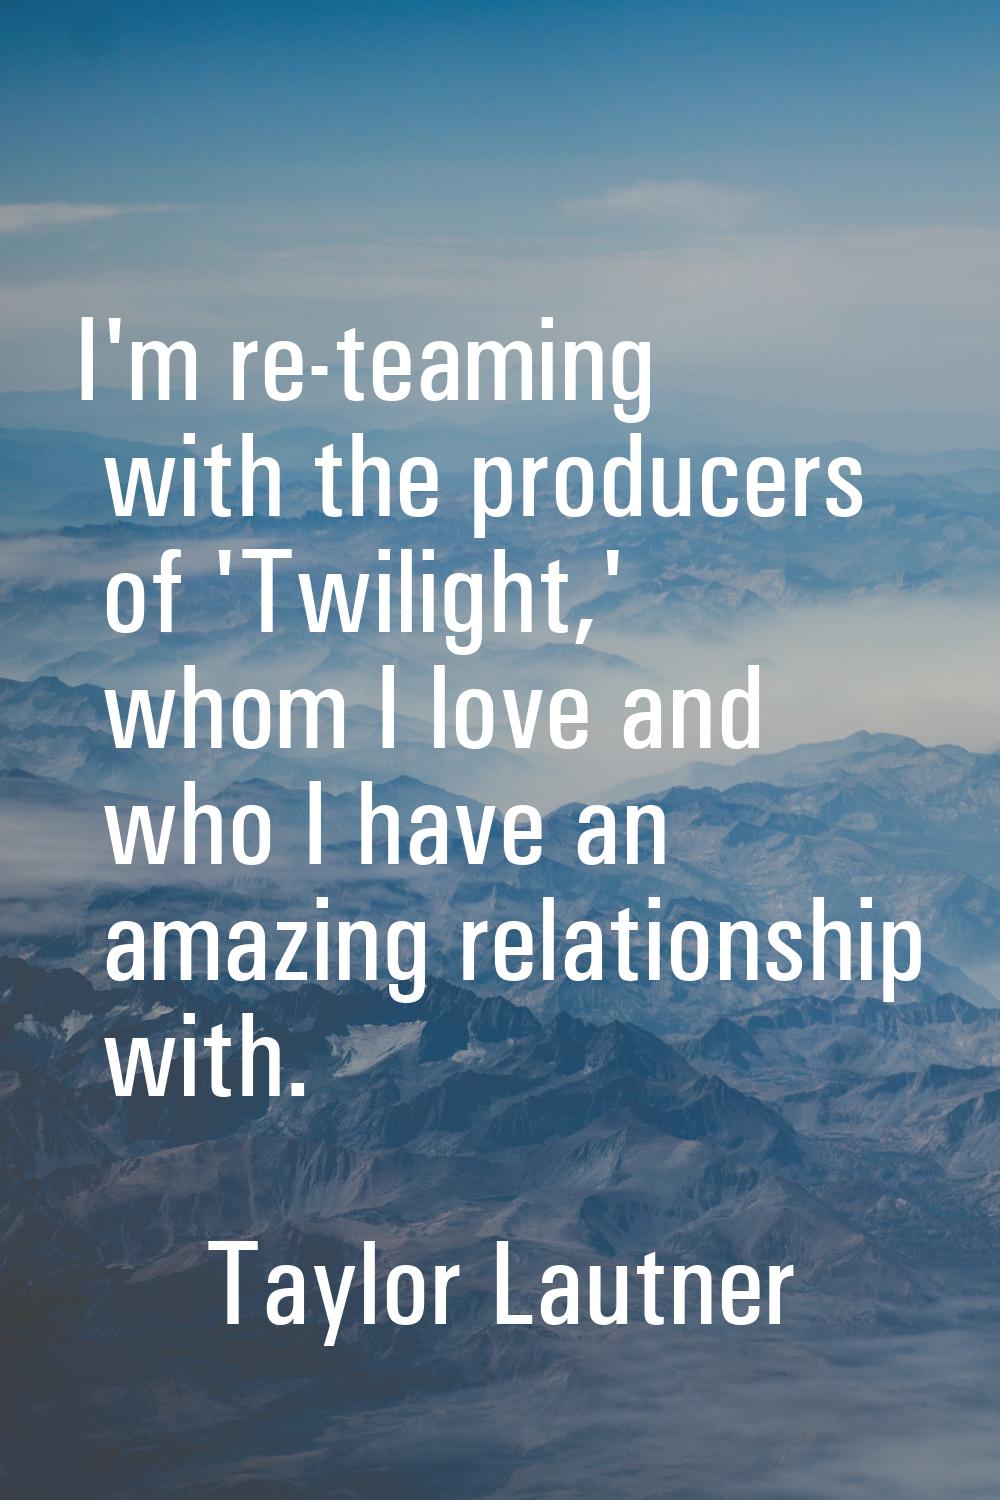 I'm re-teaming with the producers of 'Twilight,' whom I love and who I have an amazing relationship